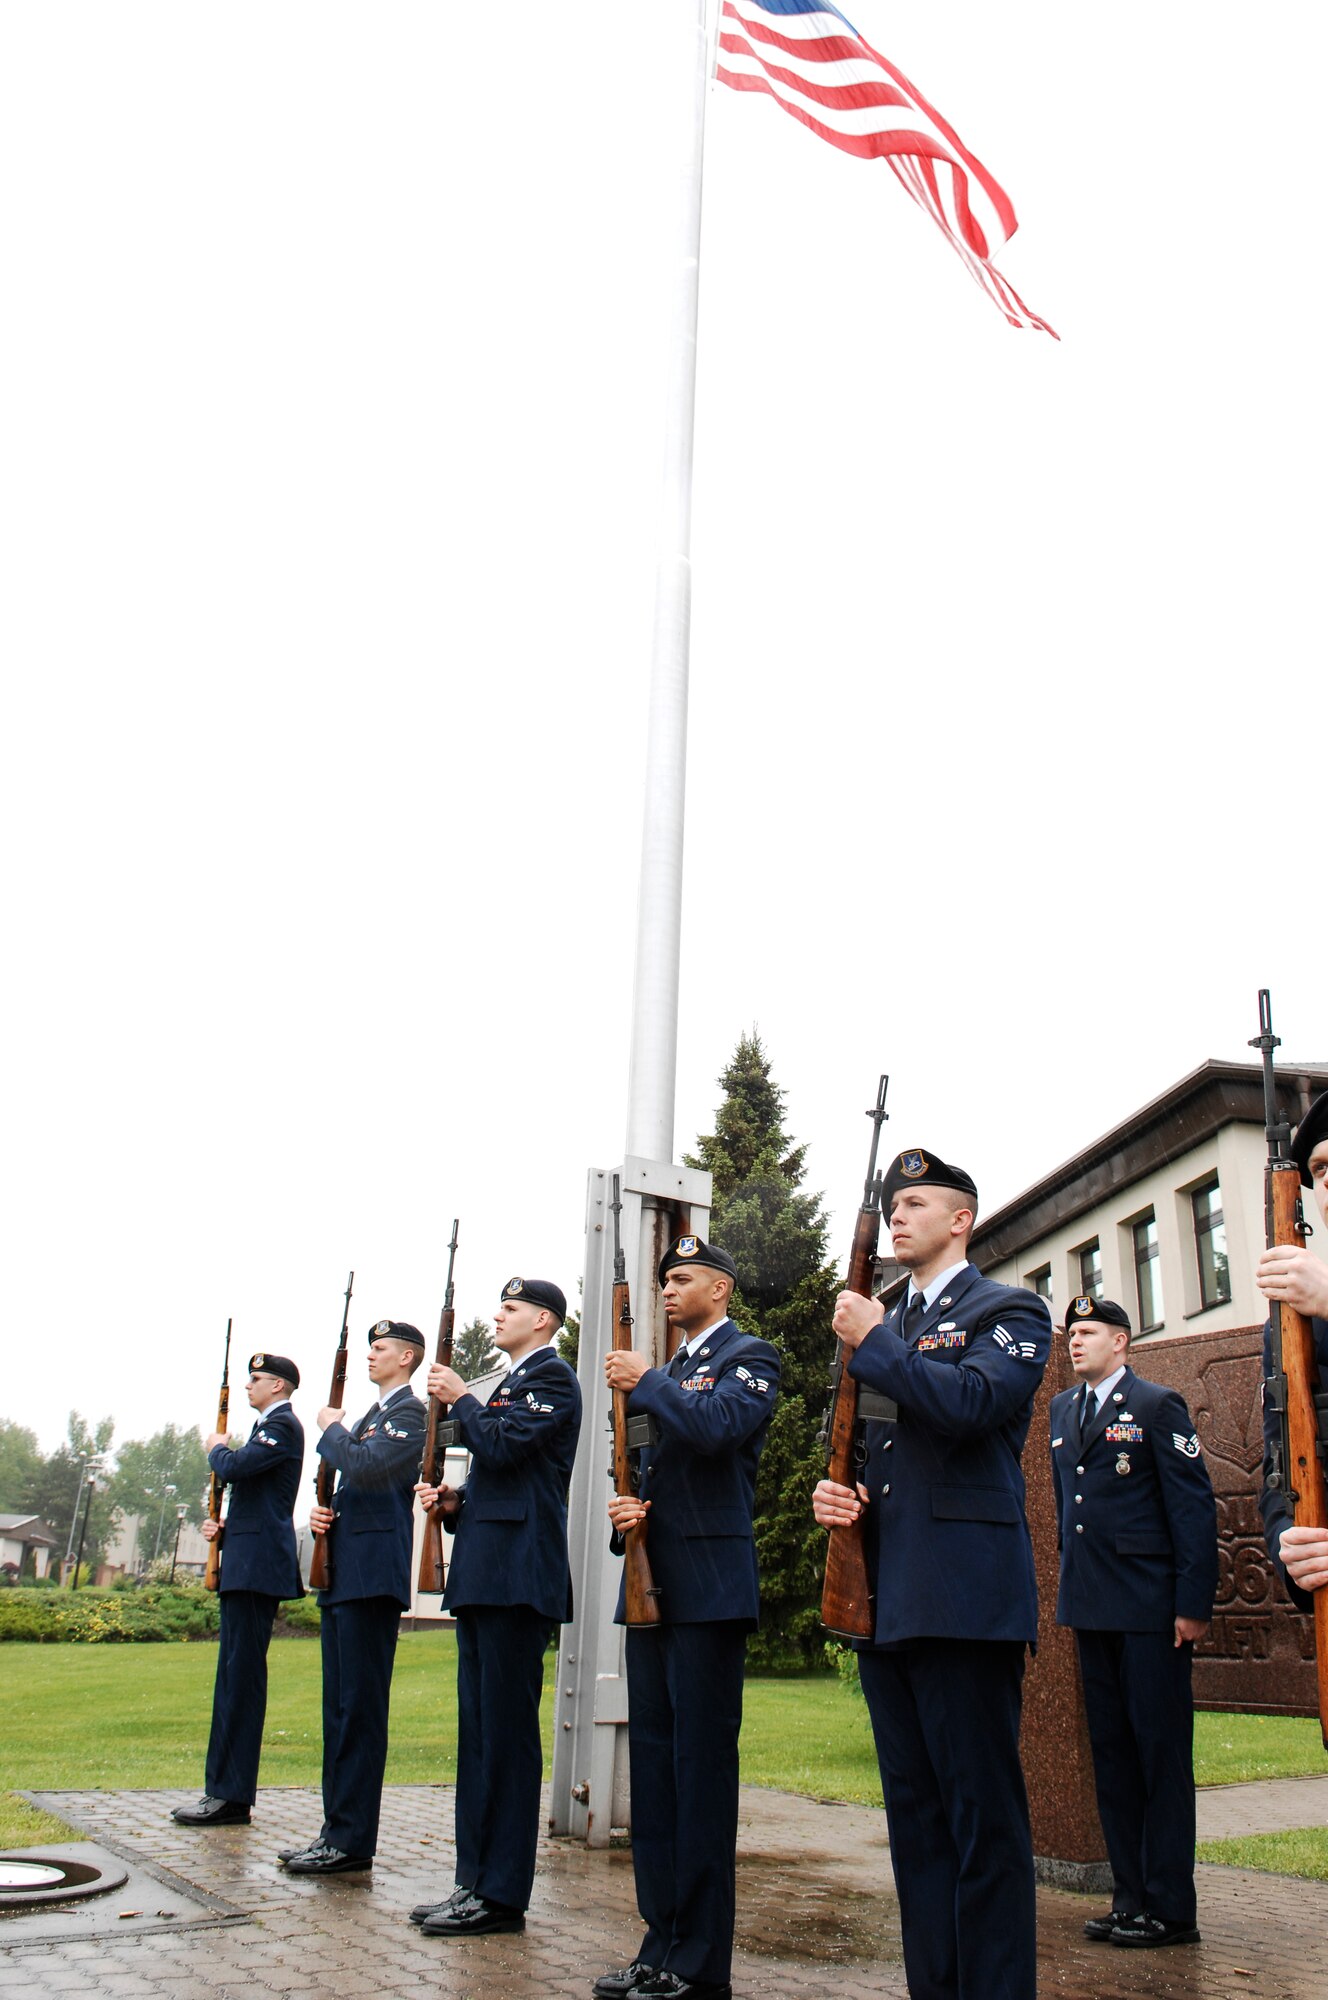 Members from police units in the Kaiserslautern Military Community conduct a 21-gun salute during a Final Guard Mount Ceremony, May 15, 2009, Ramstein Air Base, Germany. Final Guard Mount is one of many events taking place in celebration of National Police Week, a solemn period each year where every officer reflects on those who have fallen. (U.S. Air Force photo by Senior Airman Amber Bressler)